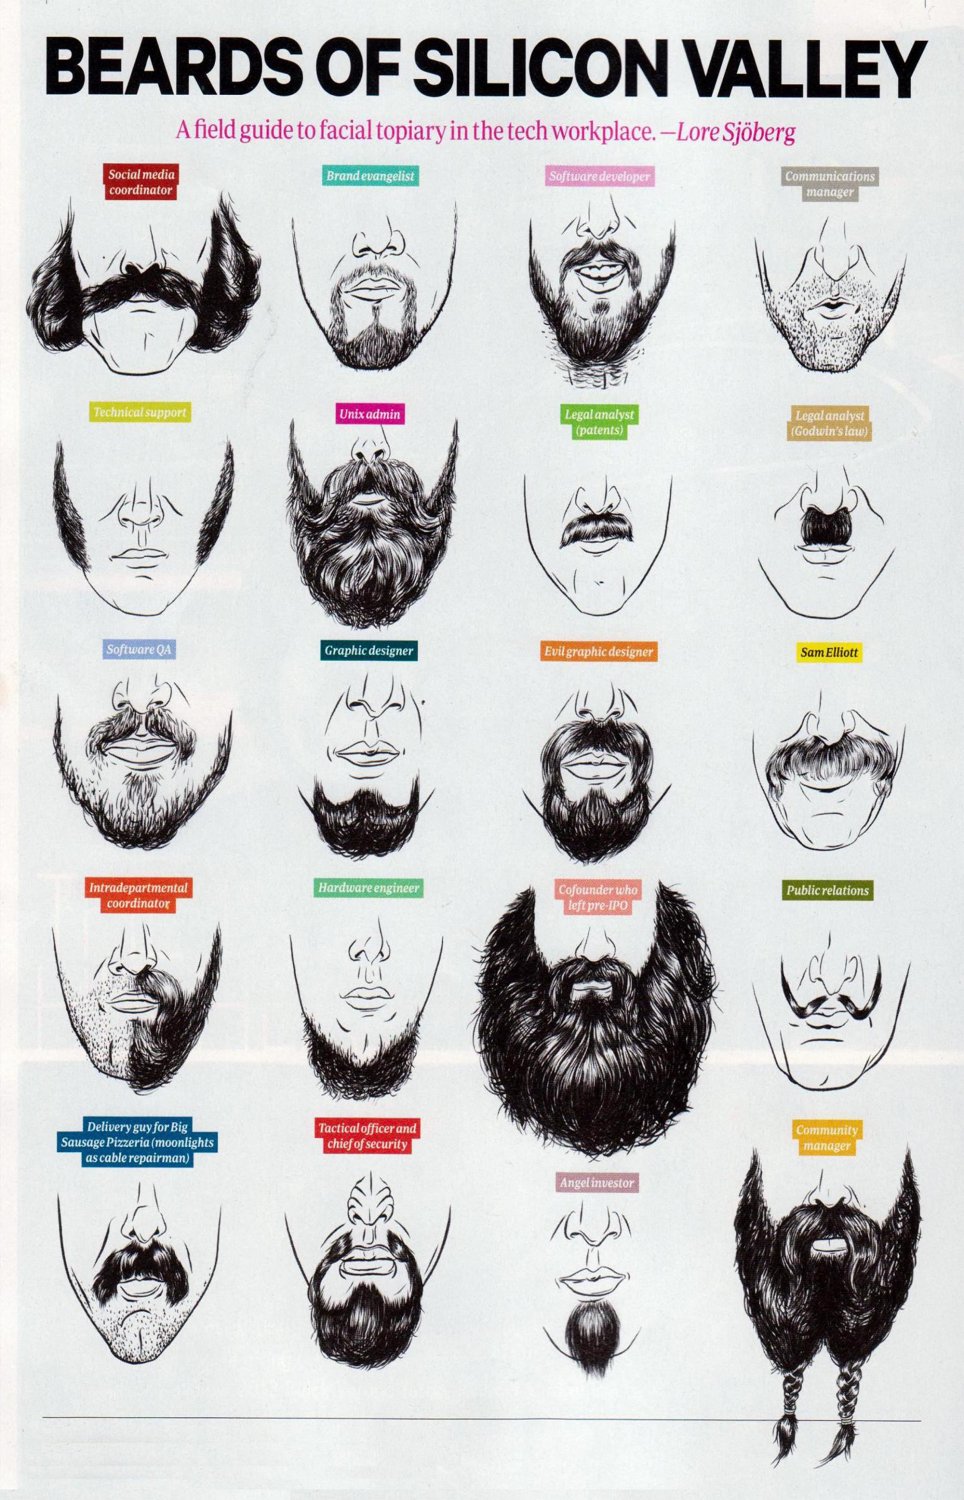 Beards of Silicon Valley Infographic Chart 18"x28" (45cm/70cm) Canvas Print